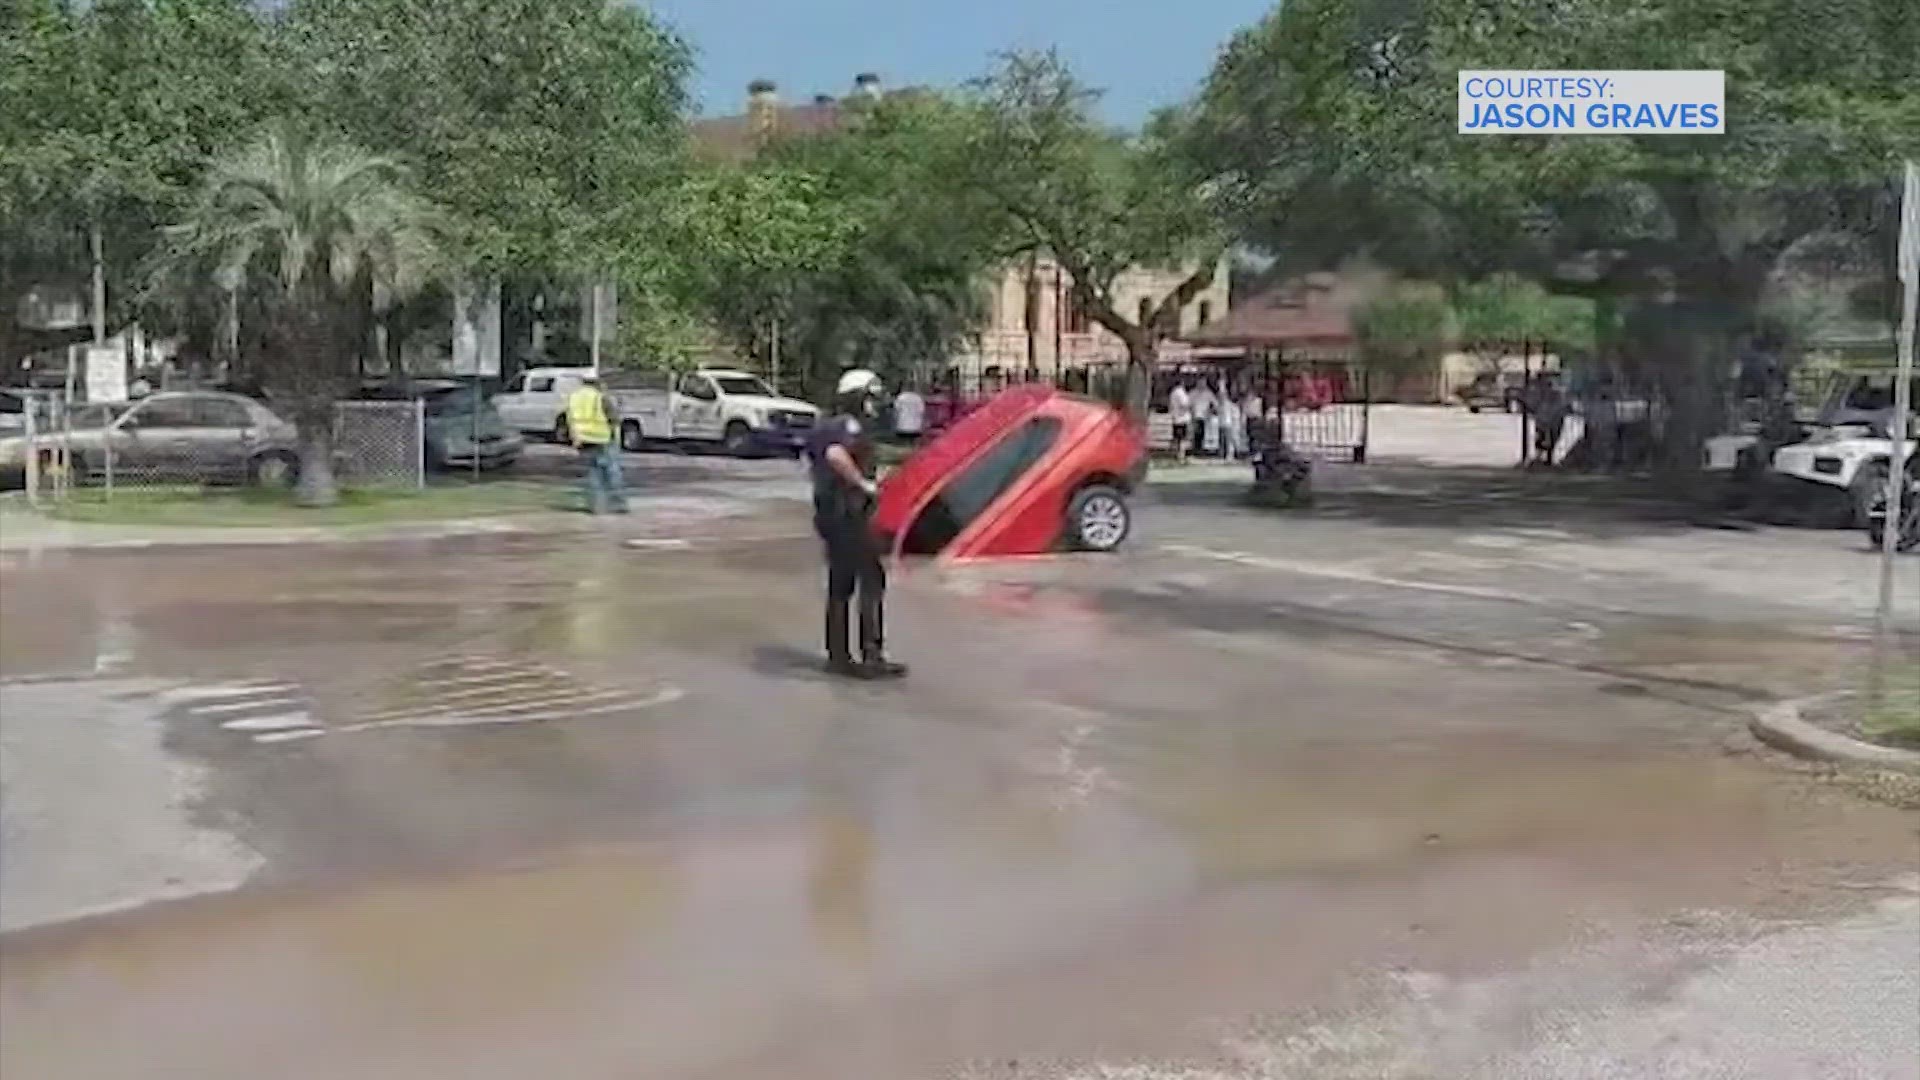 It was a bad day Tuesday for a driver who ended up partially submerged in a giant sinkhole in Galveston, according to city officials.